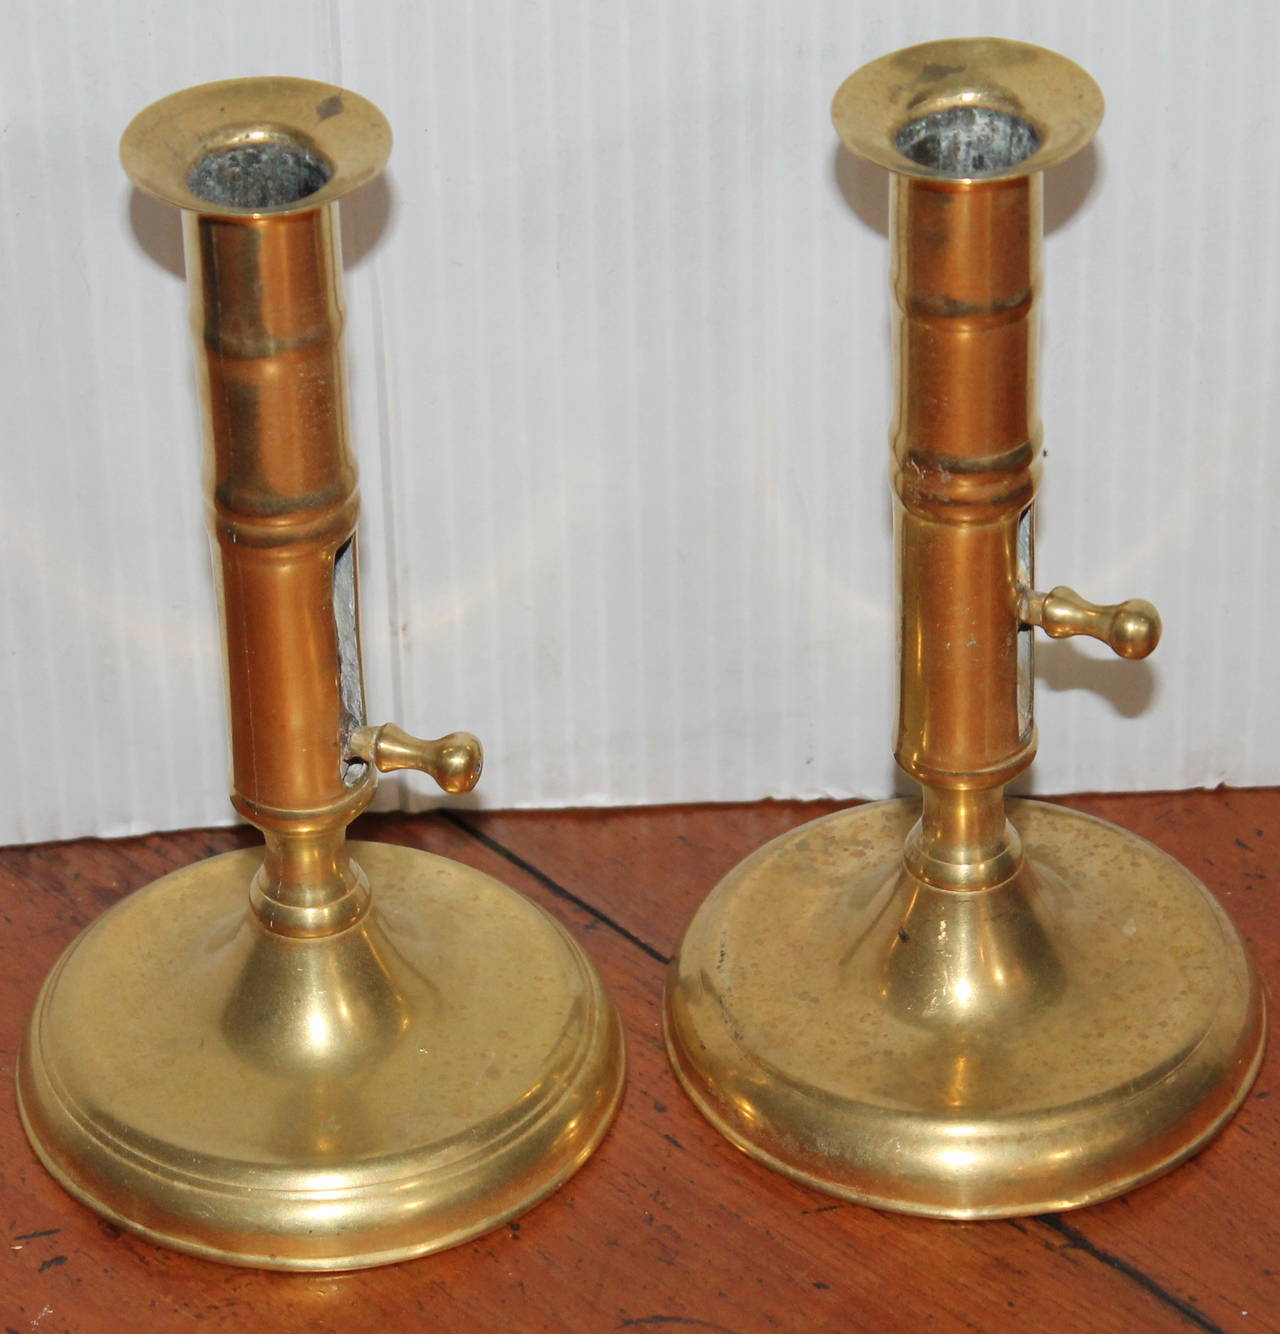 This is an amazing pair of 18th century brass push up candlestick holders from England. This is most unusual finding a matching pair of this particular form.